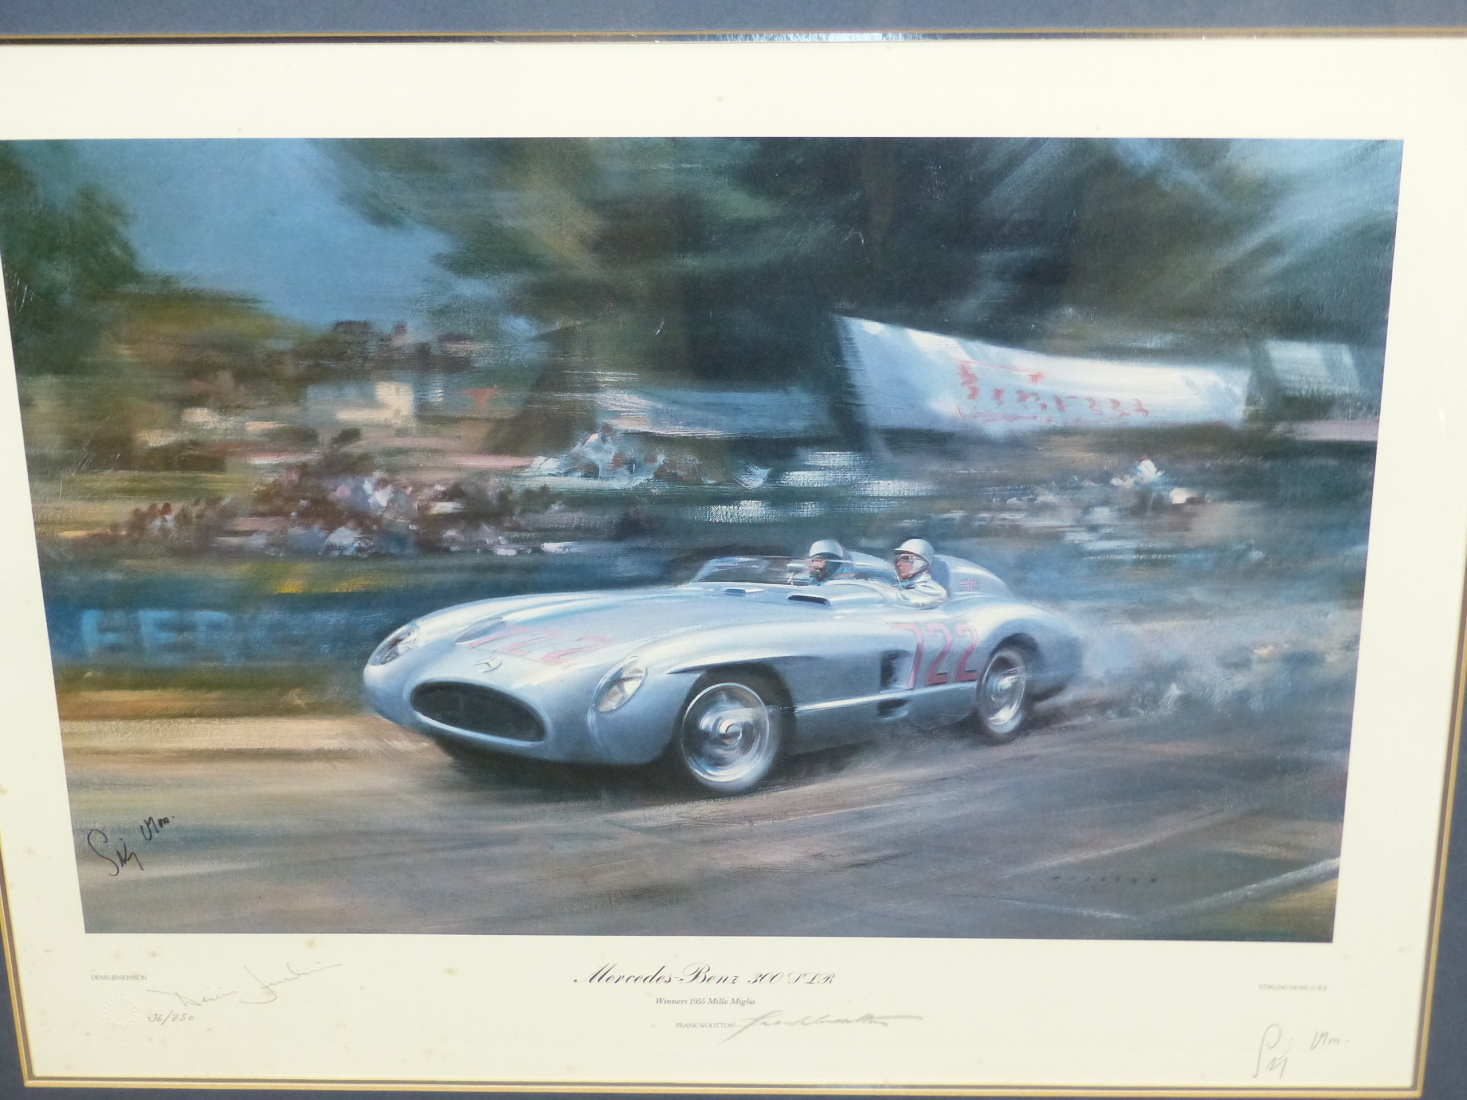 RODNEY DIGGINS, "STERLING MOSS" MONACO 1956, WATERCOLOUR SIGNED AND DATED 1980,TOGETHER WITH - Image 6 of 11